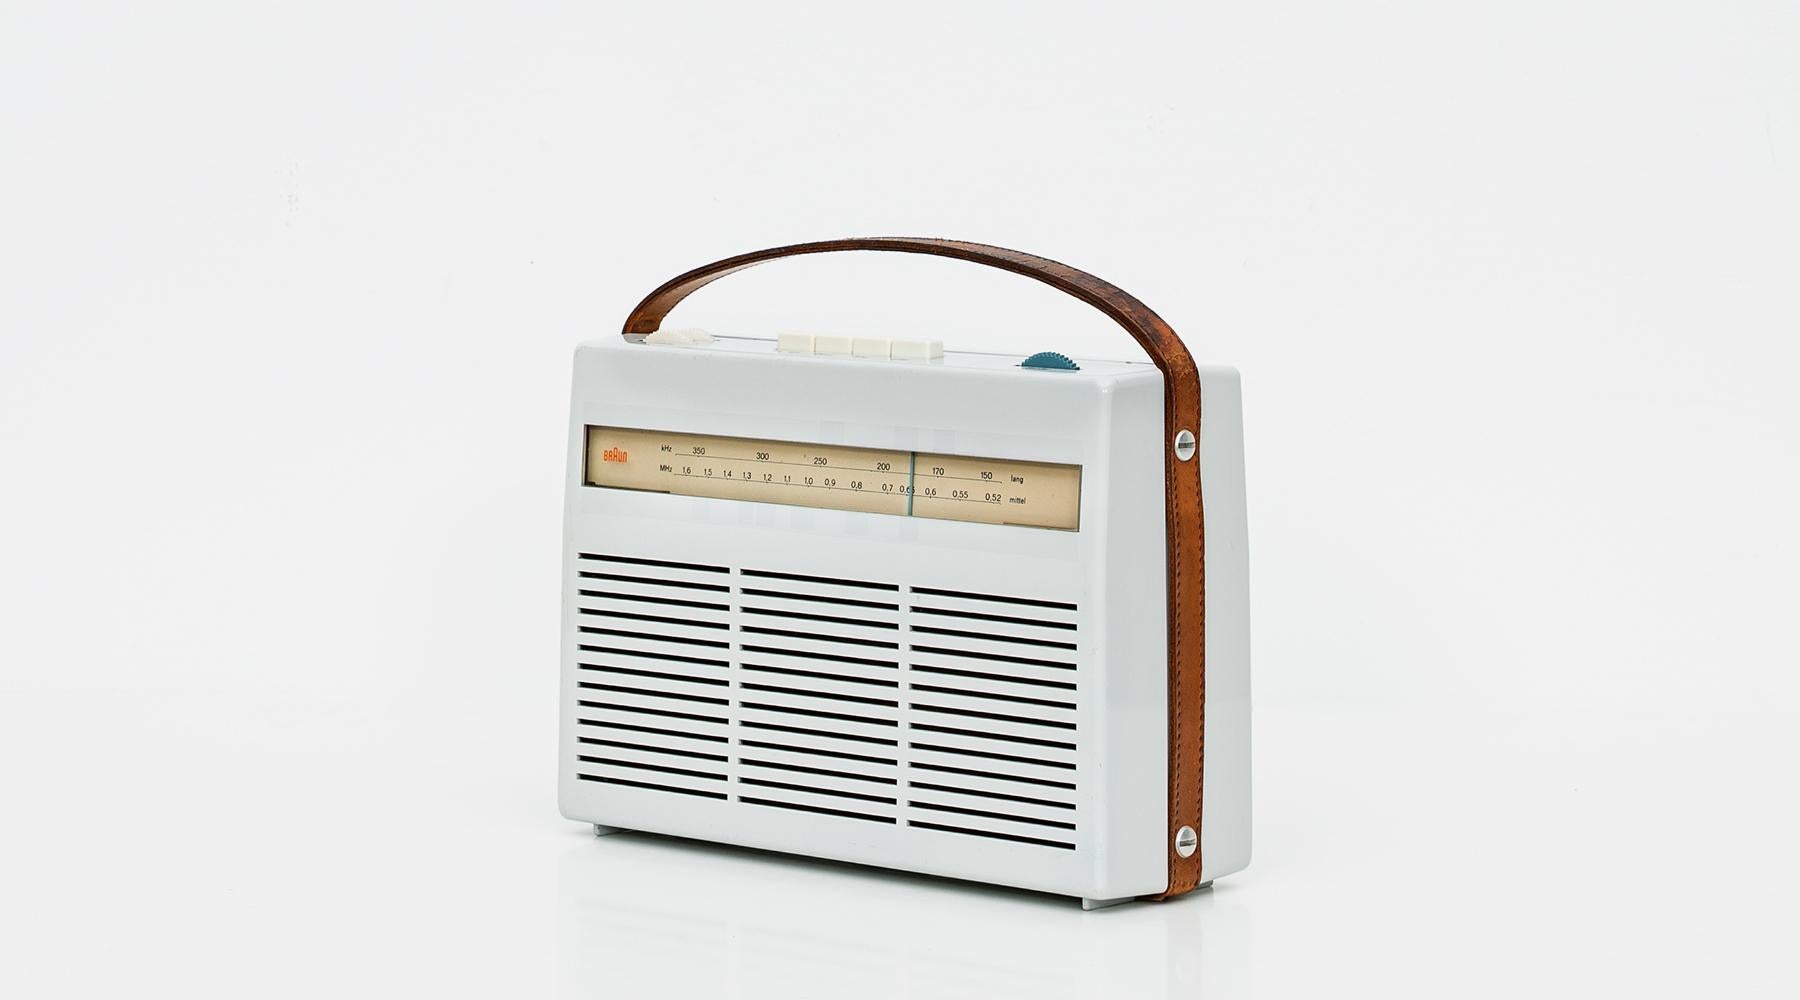 Portable radio T22, design made in Germany, original by Dieter Rams, 1960.

This wonderful example of portable radio T 22 by Dieter Rams is made of synthetic material with the original brown leather strap. The radio is in an exceptionally good and